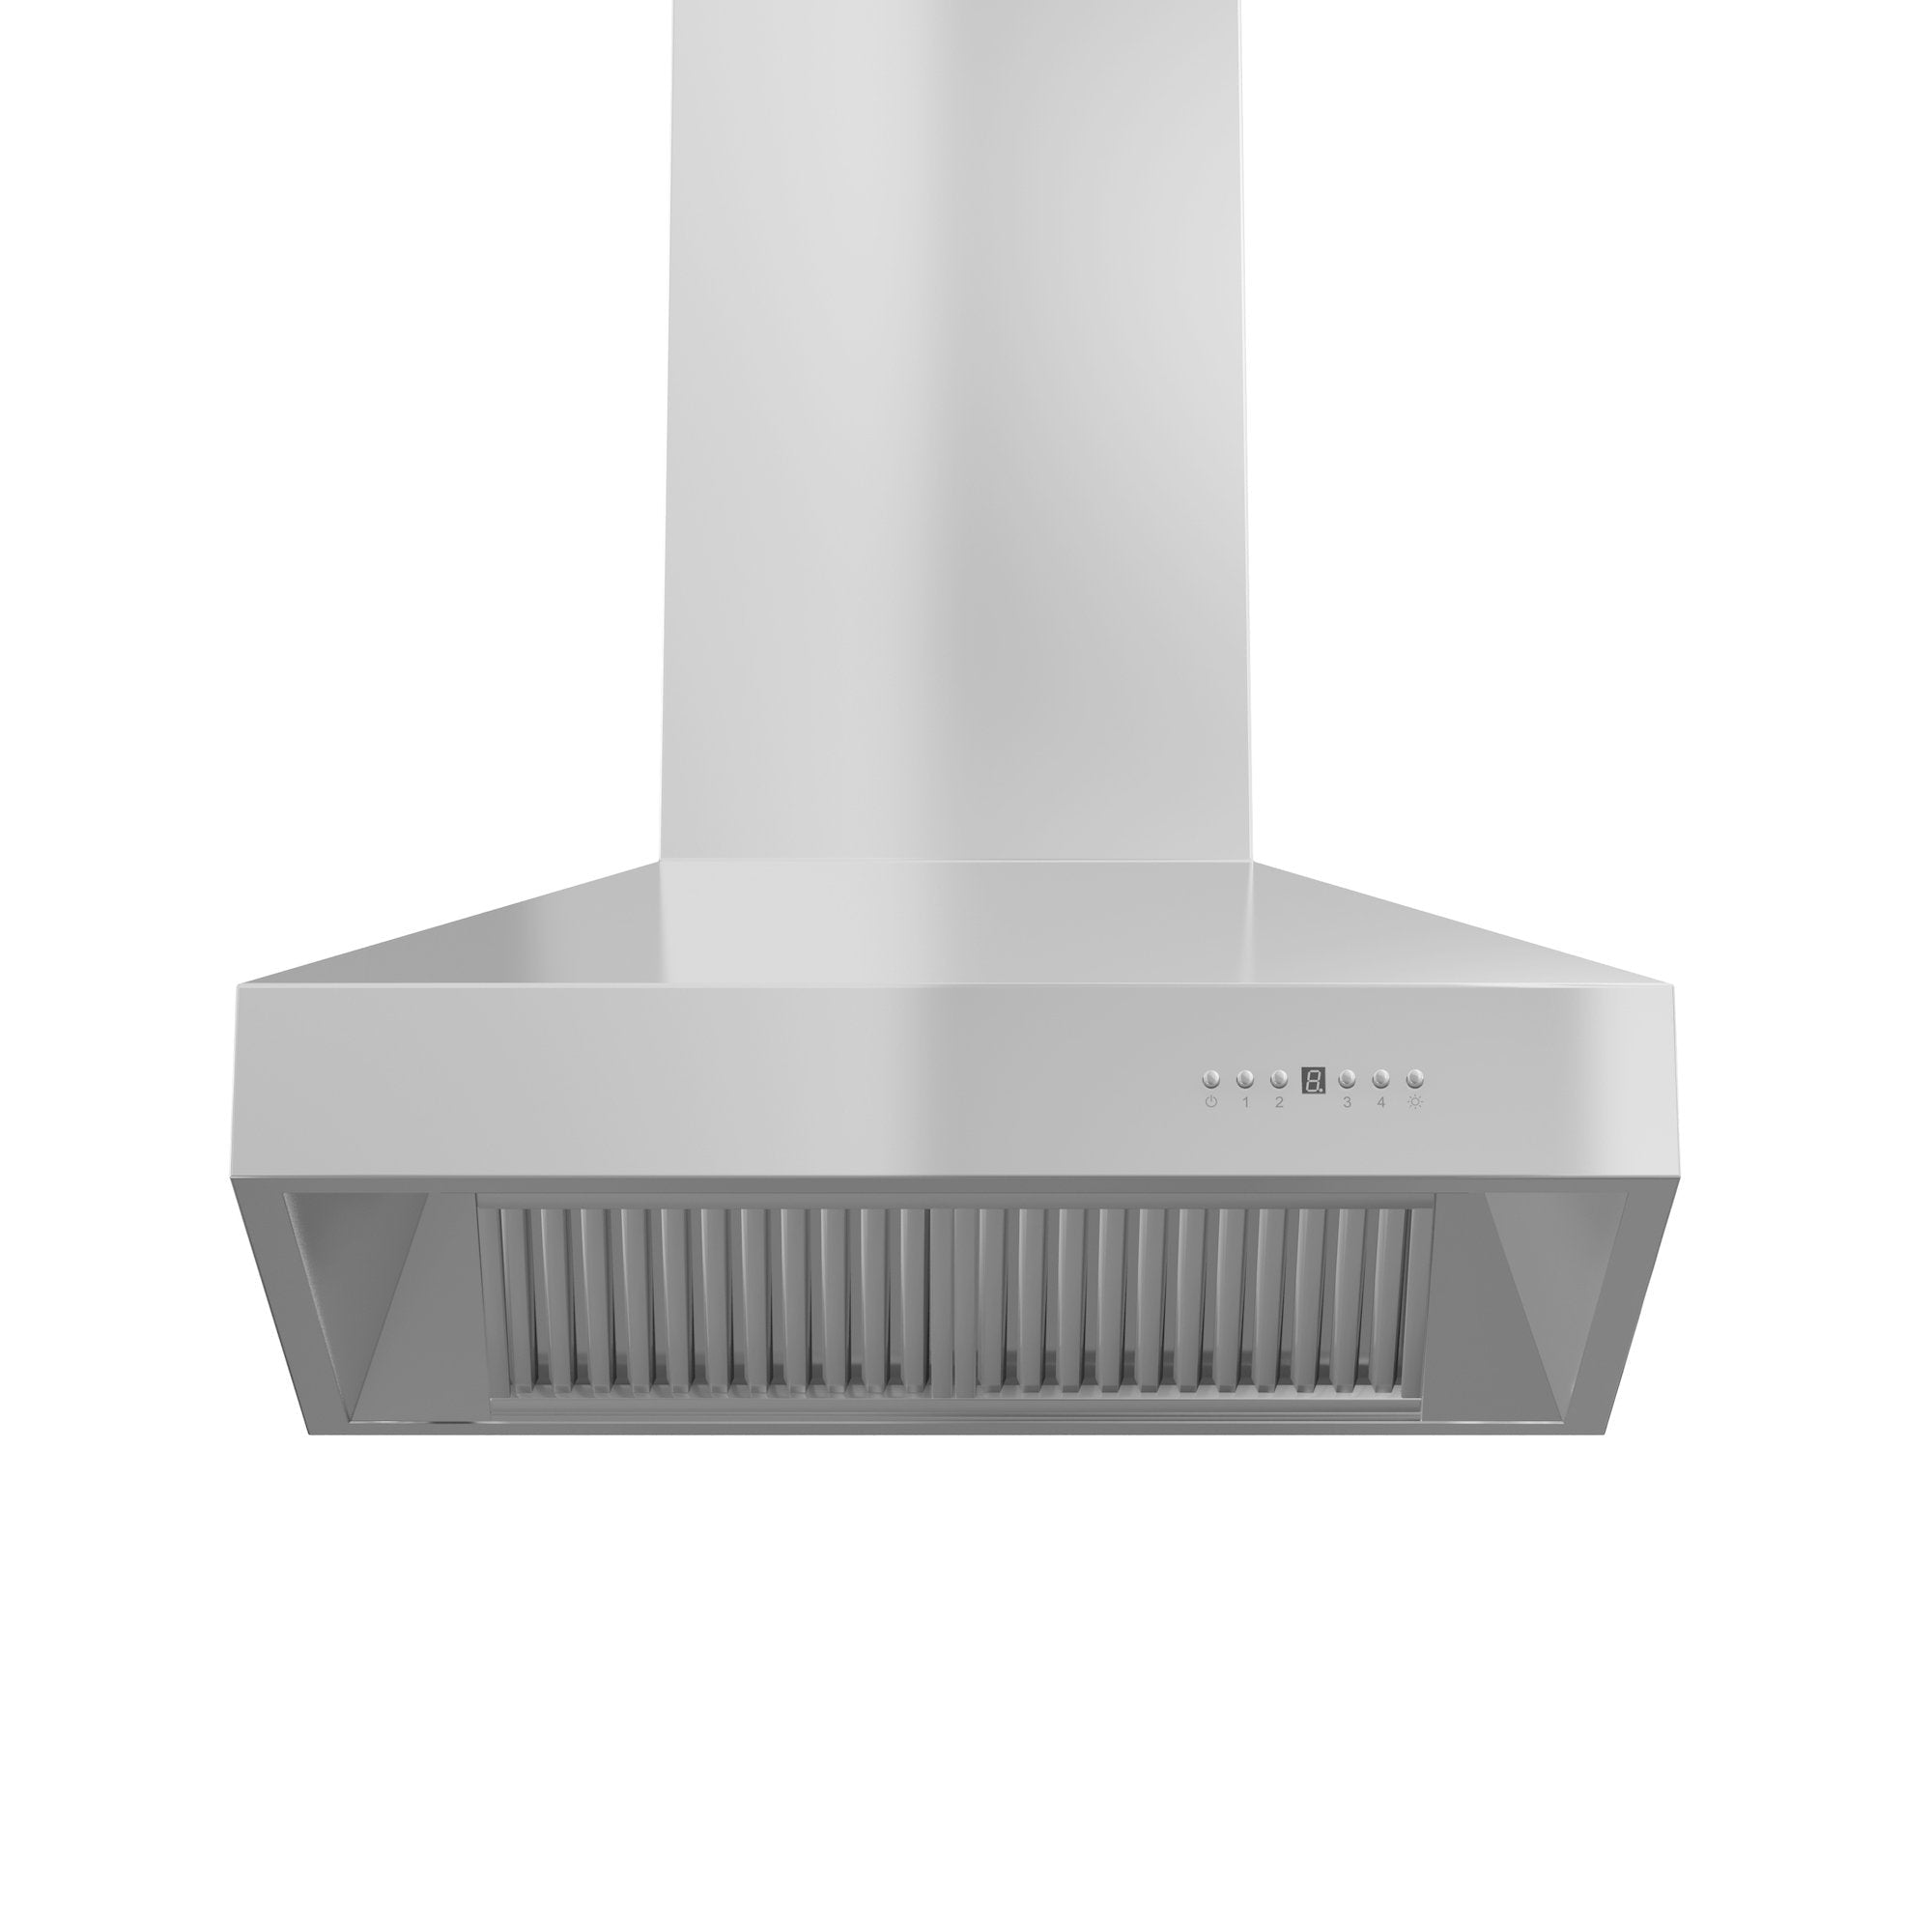 ZLINE Professional Convertible Vent Wall Mount Range Hood in Stainless Steel (697) - New Star Living